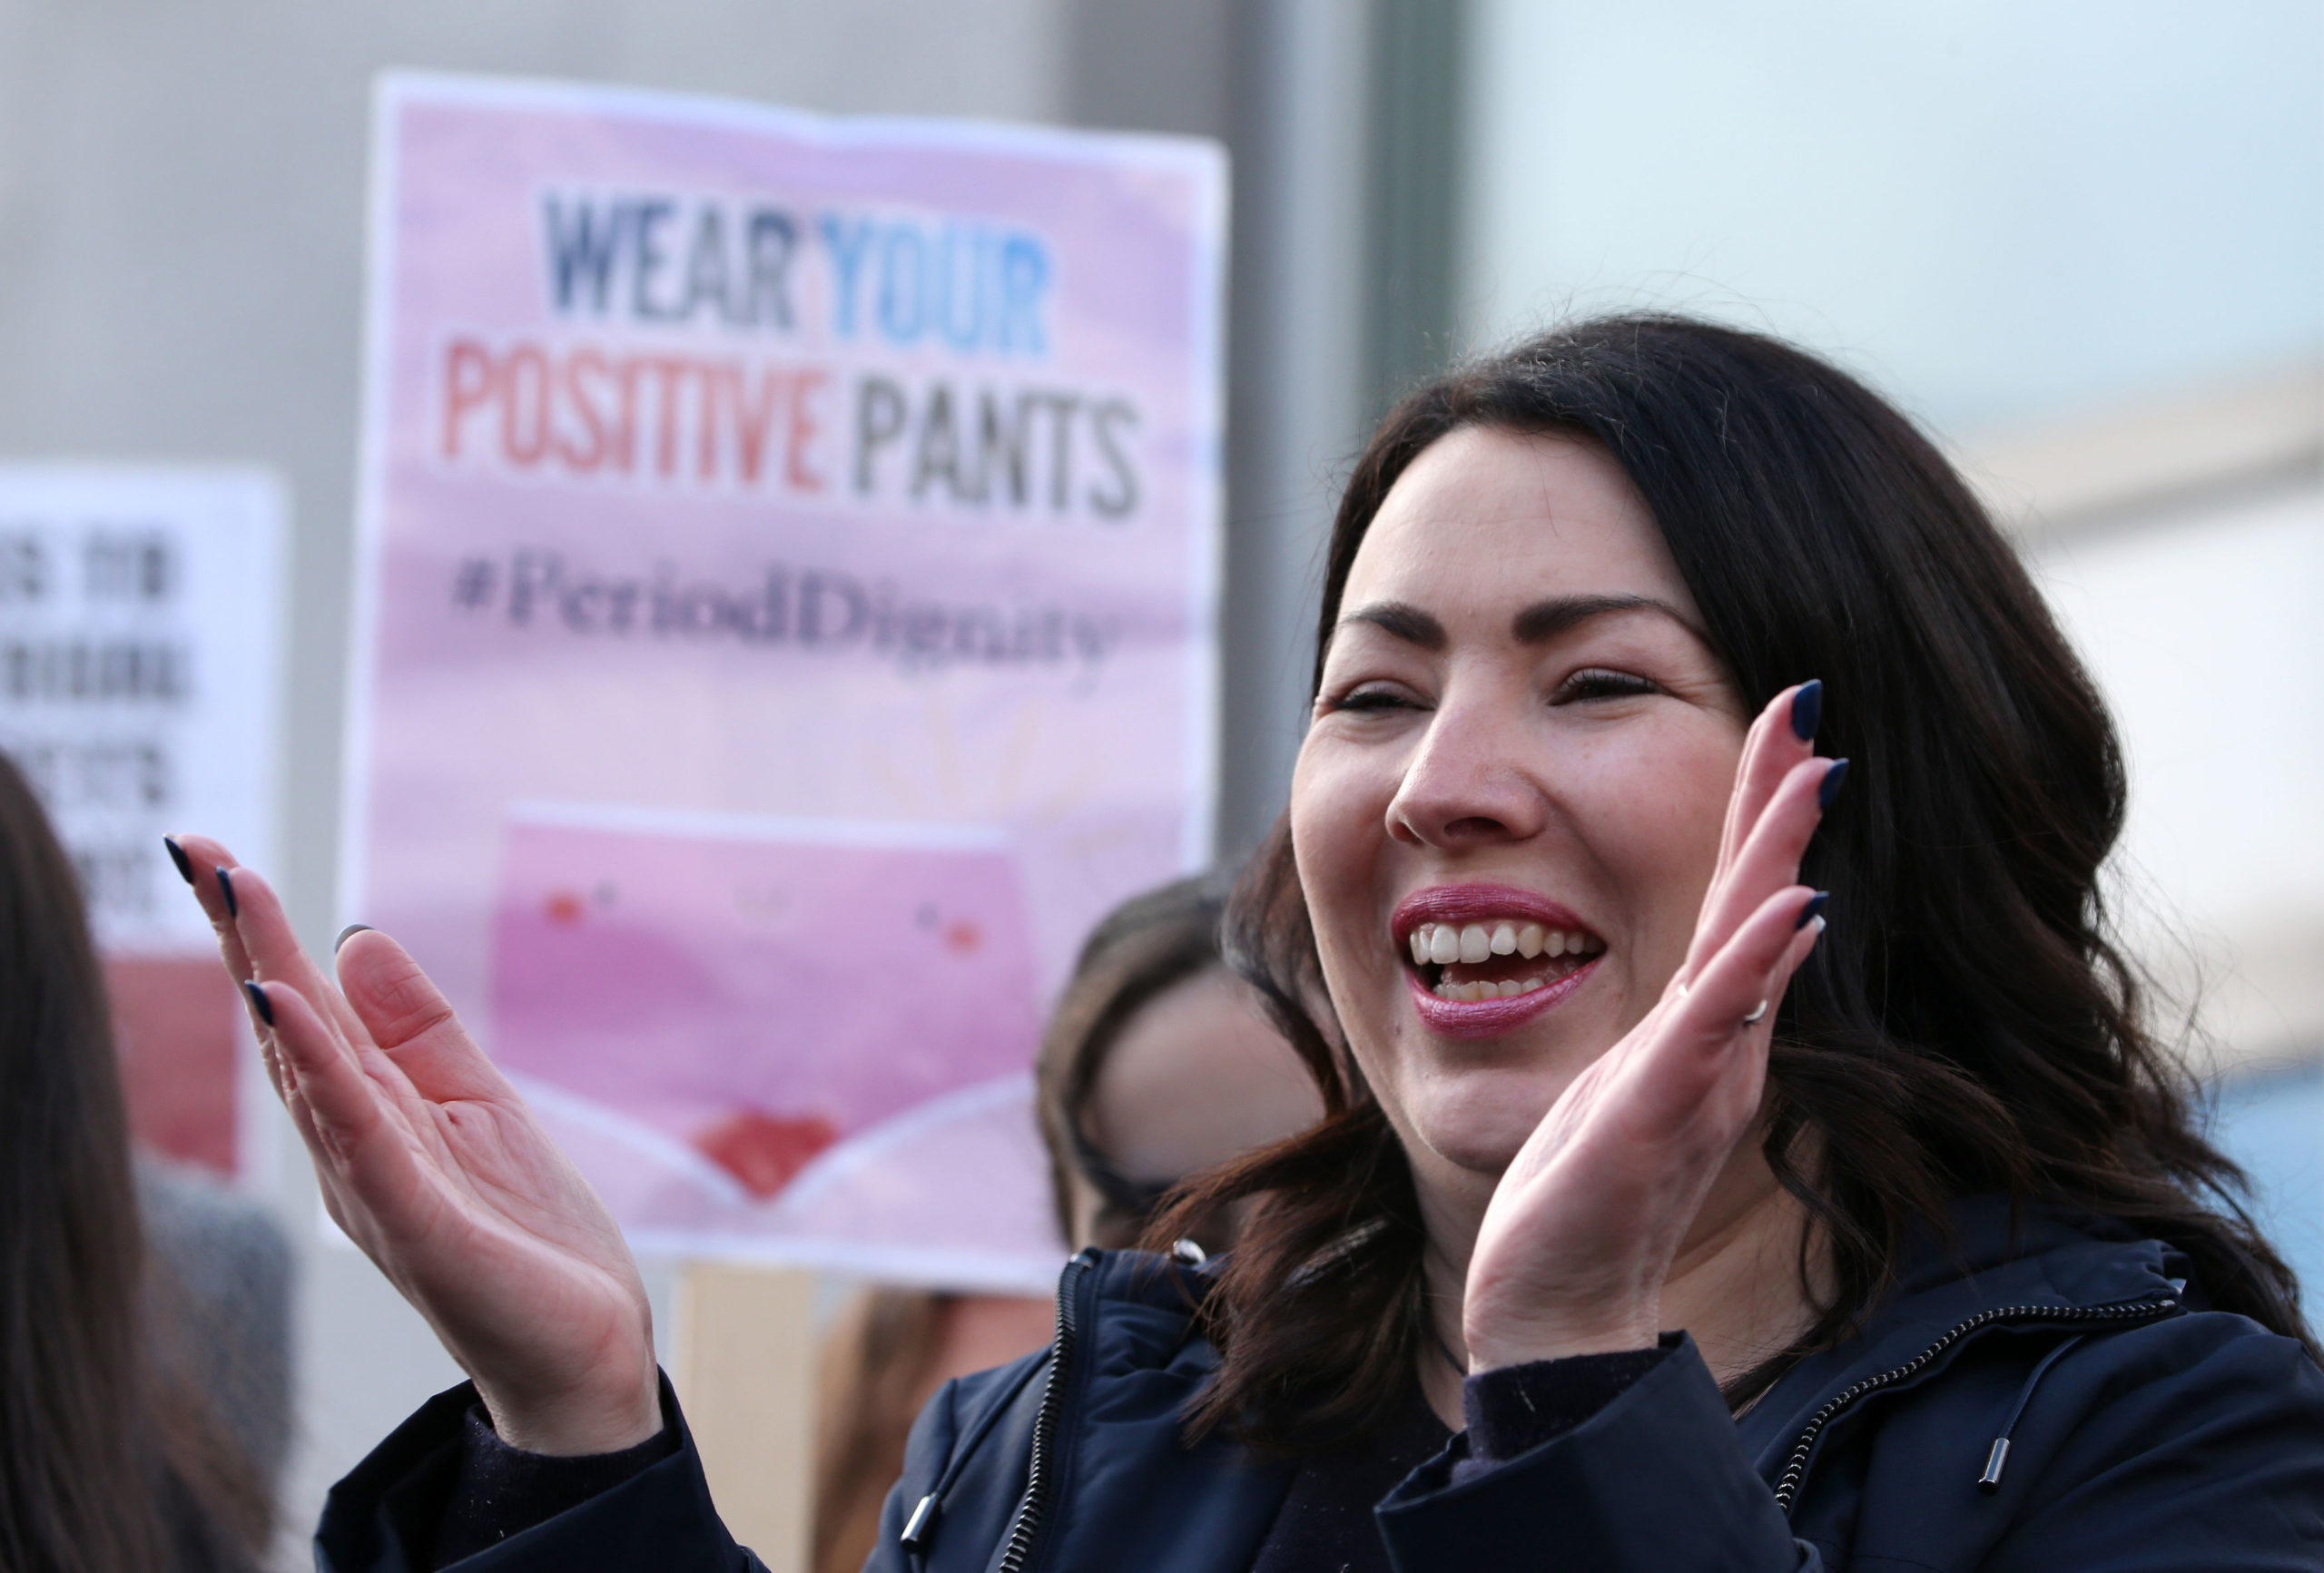 Monica Lennon MSP joins supporters of the Period Products bill at a rally outside Parliament in Edinburgh.